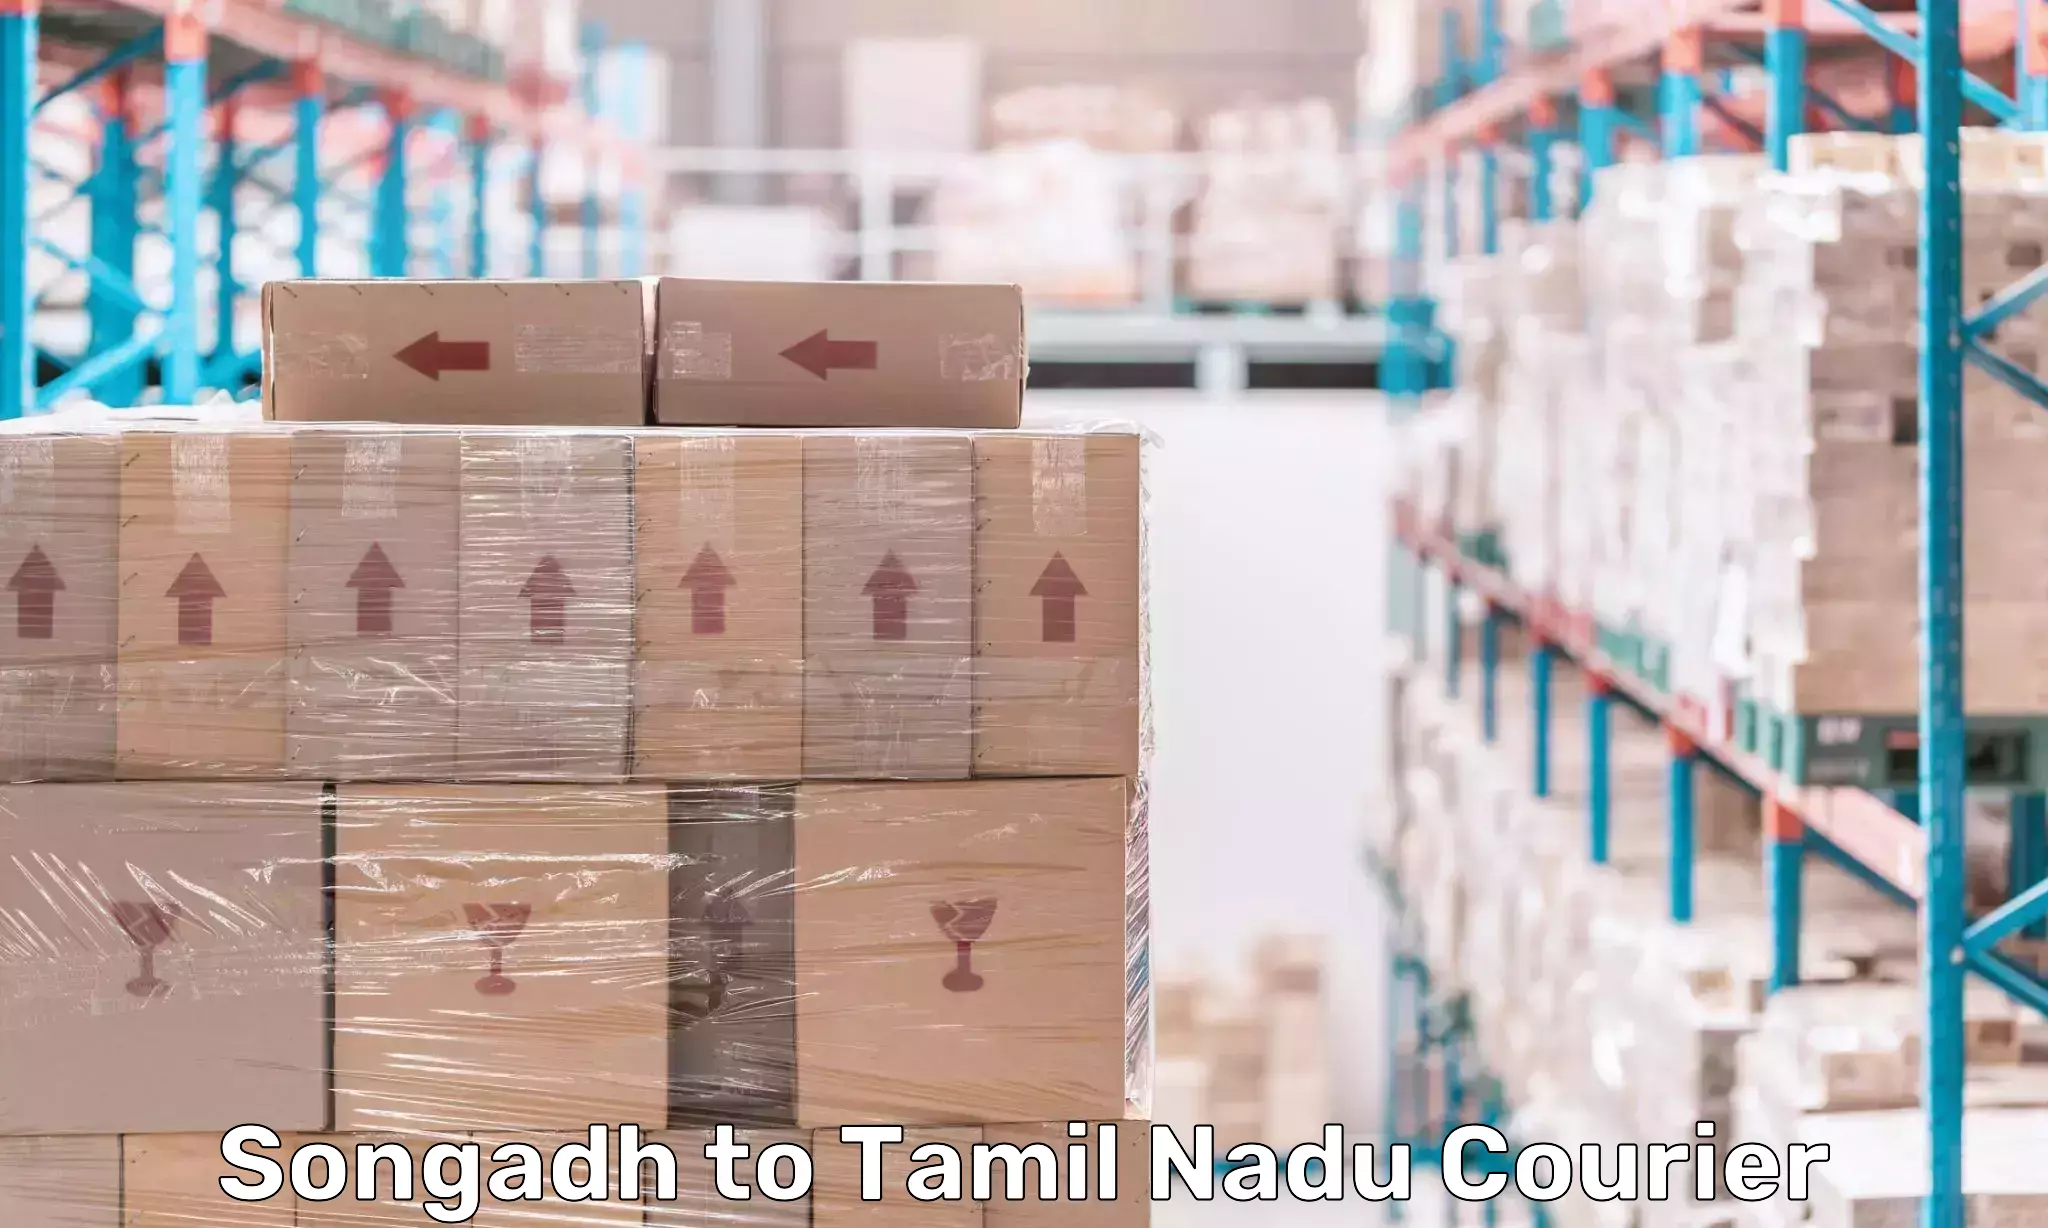 Large package courier Songadh to Tamil Nadu